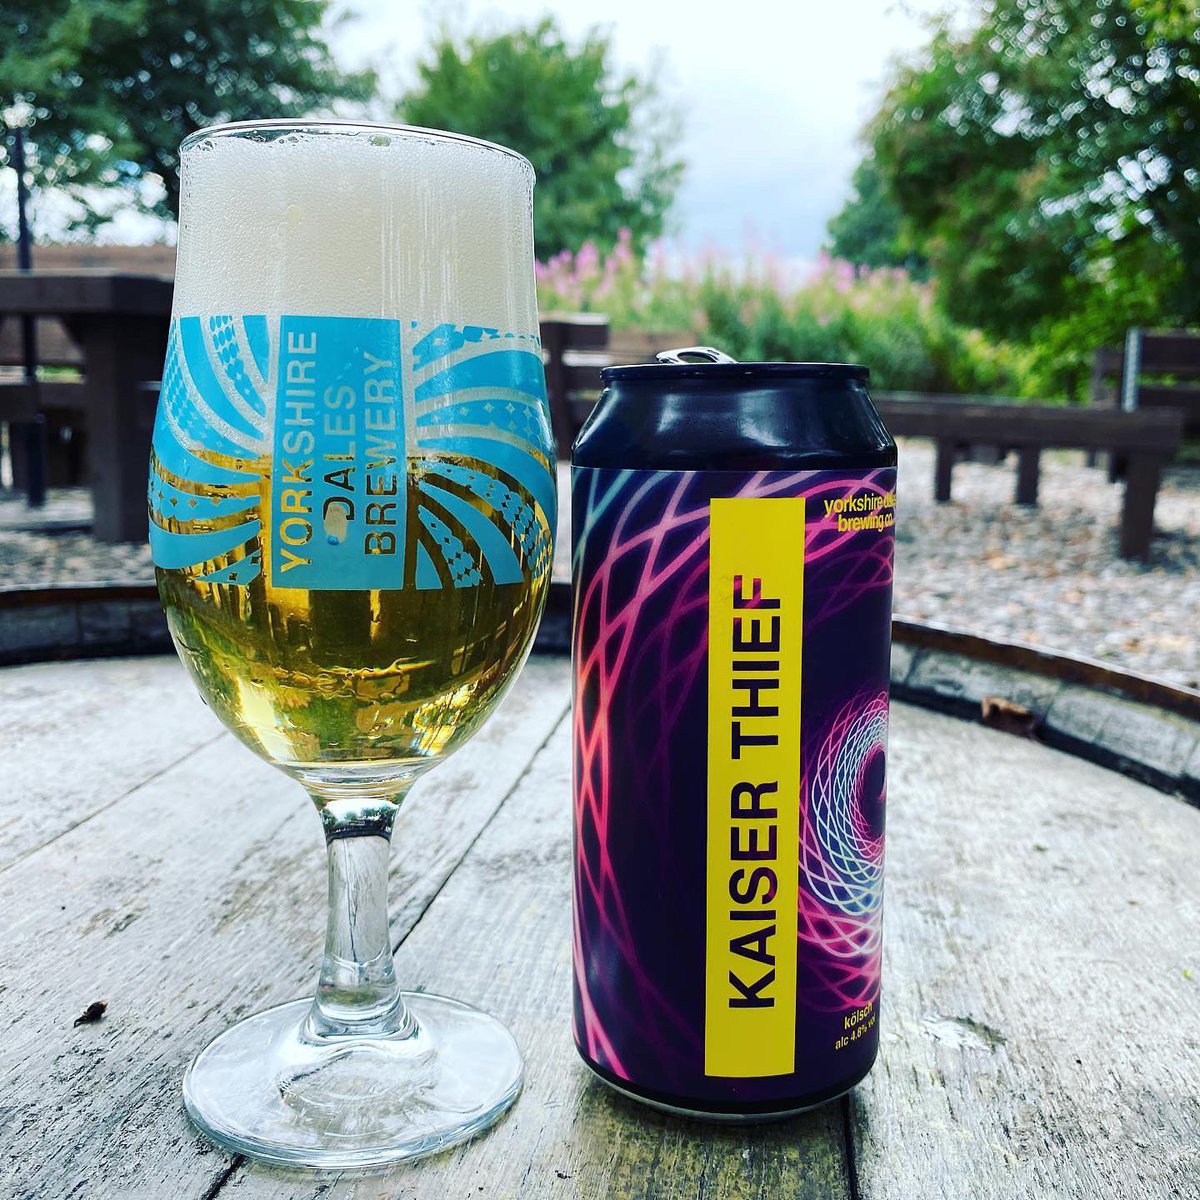 New Craft can drop 💣 💥  

A brand new Kolsch from the brewery that can 🙌 #alwayscreating 
#craftcan #craftbeer #kolsch #topfermented #germanbeer #ipredictariot